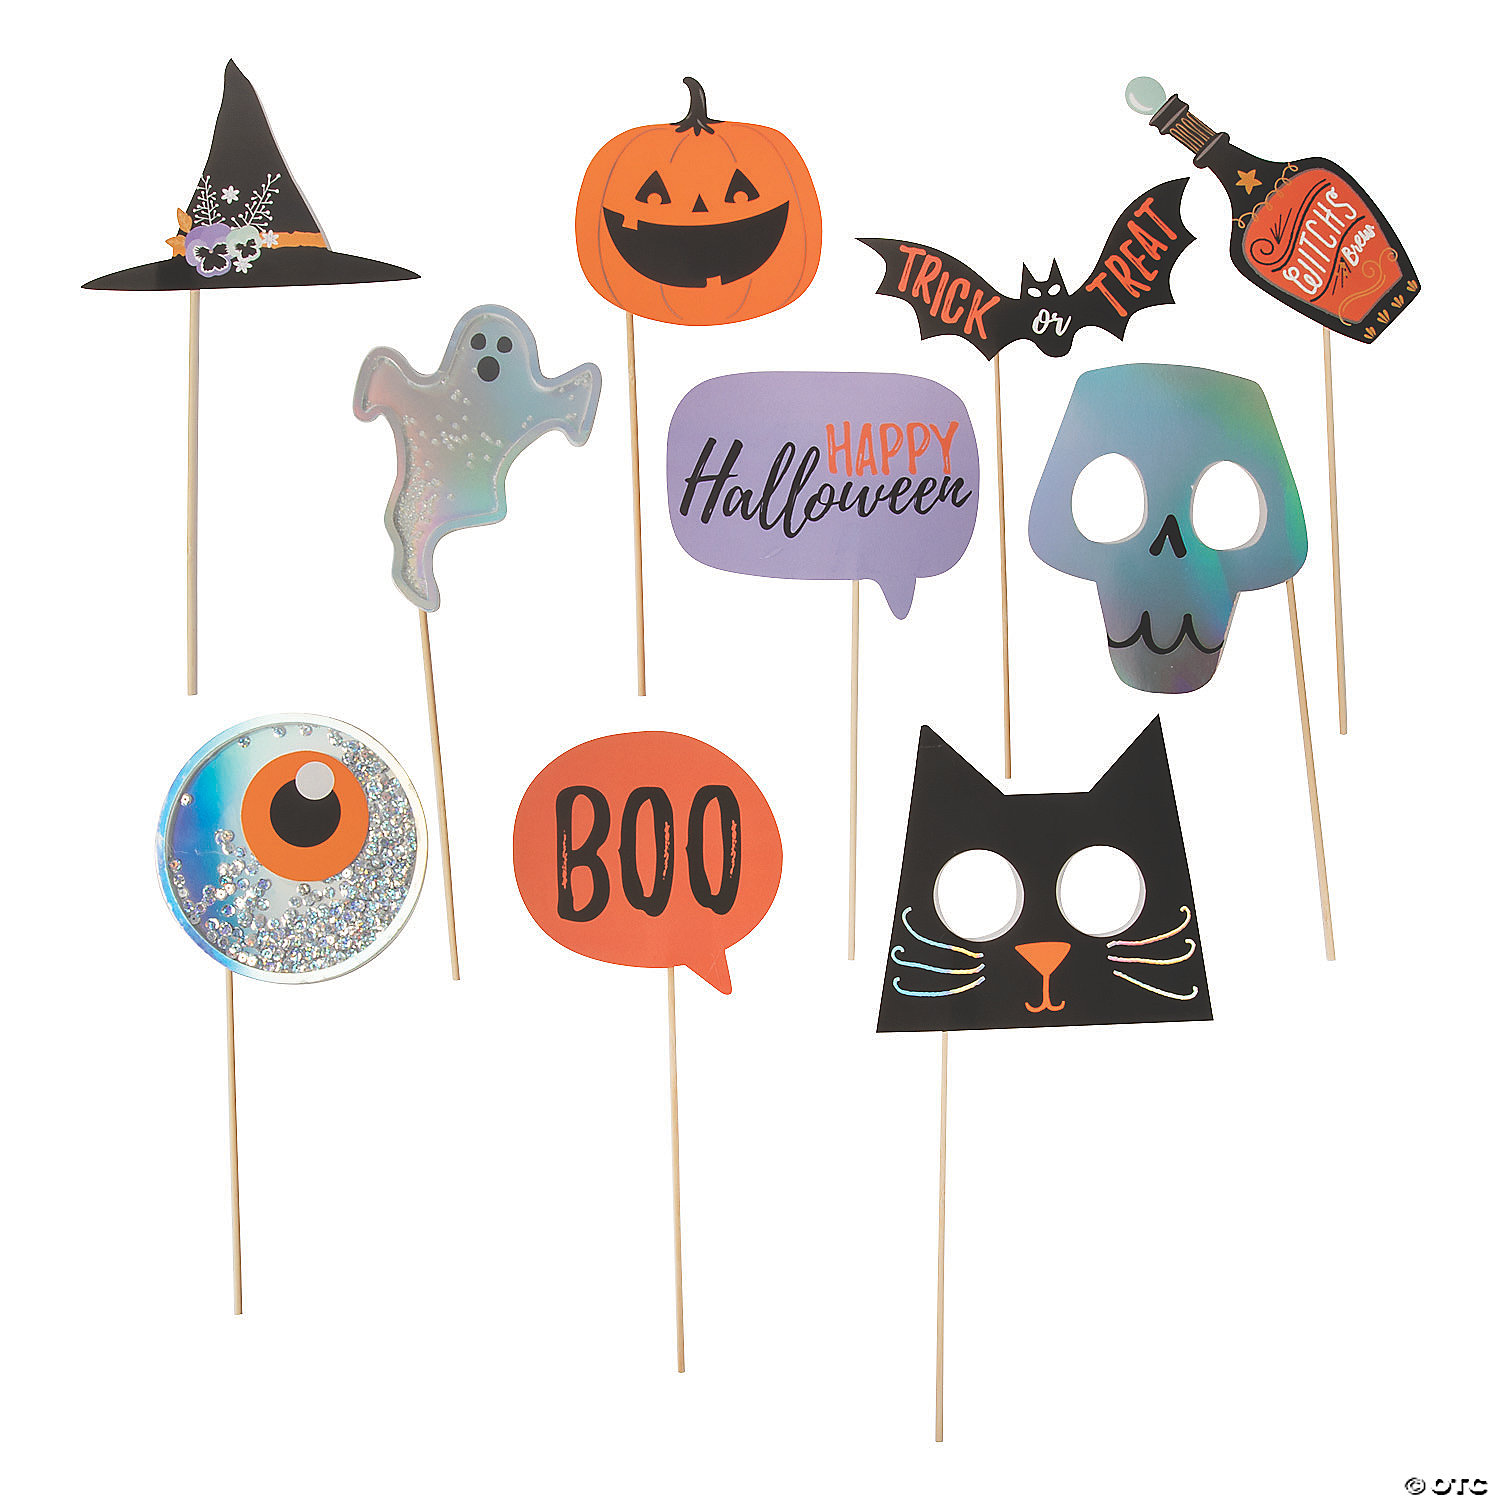 Trick or Treat Halloween Photo Booth Props Party Decorations Fun Pictures 10 pcs 